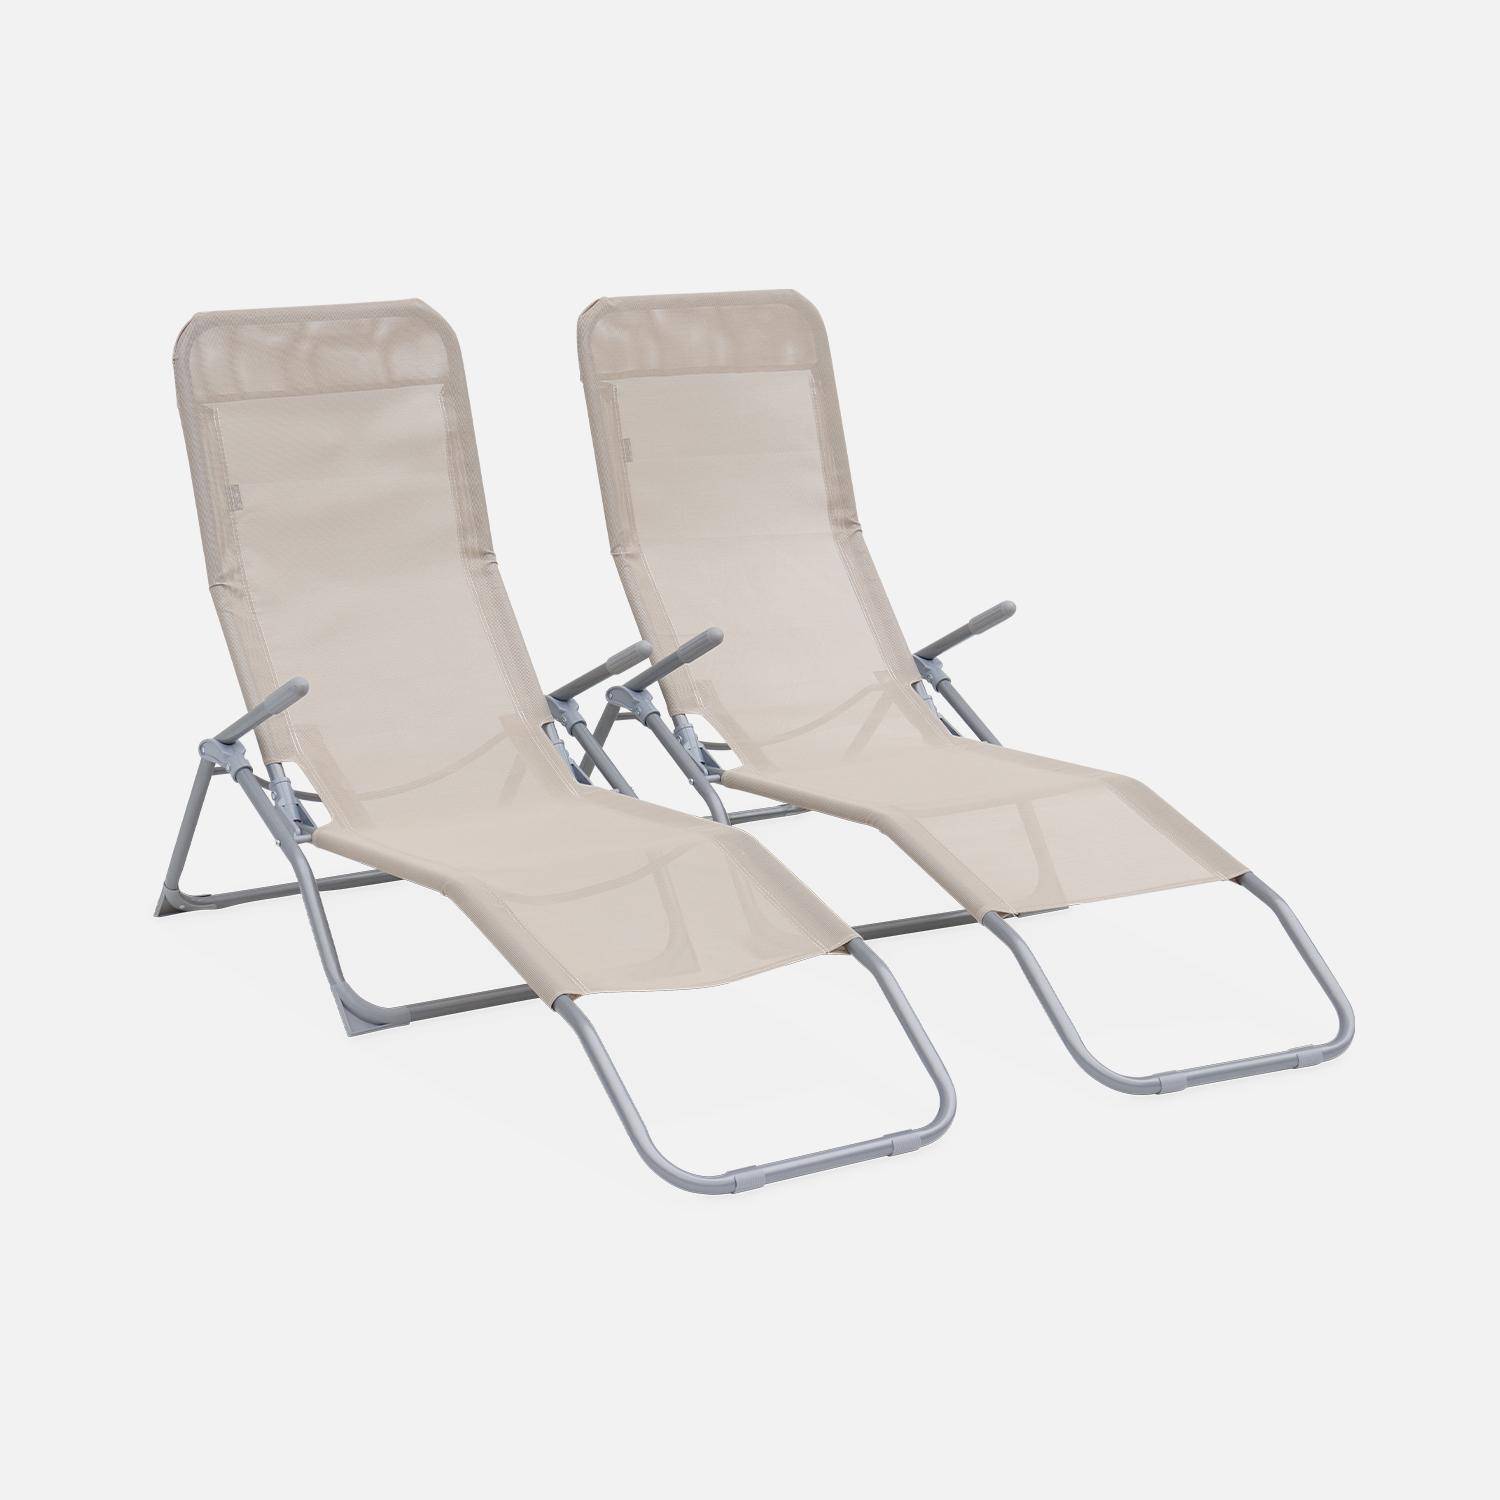 Set of 2 textilene sun loungers - 2 positions - Levito - Taupe Photo3